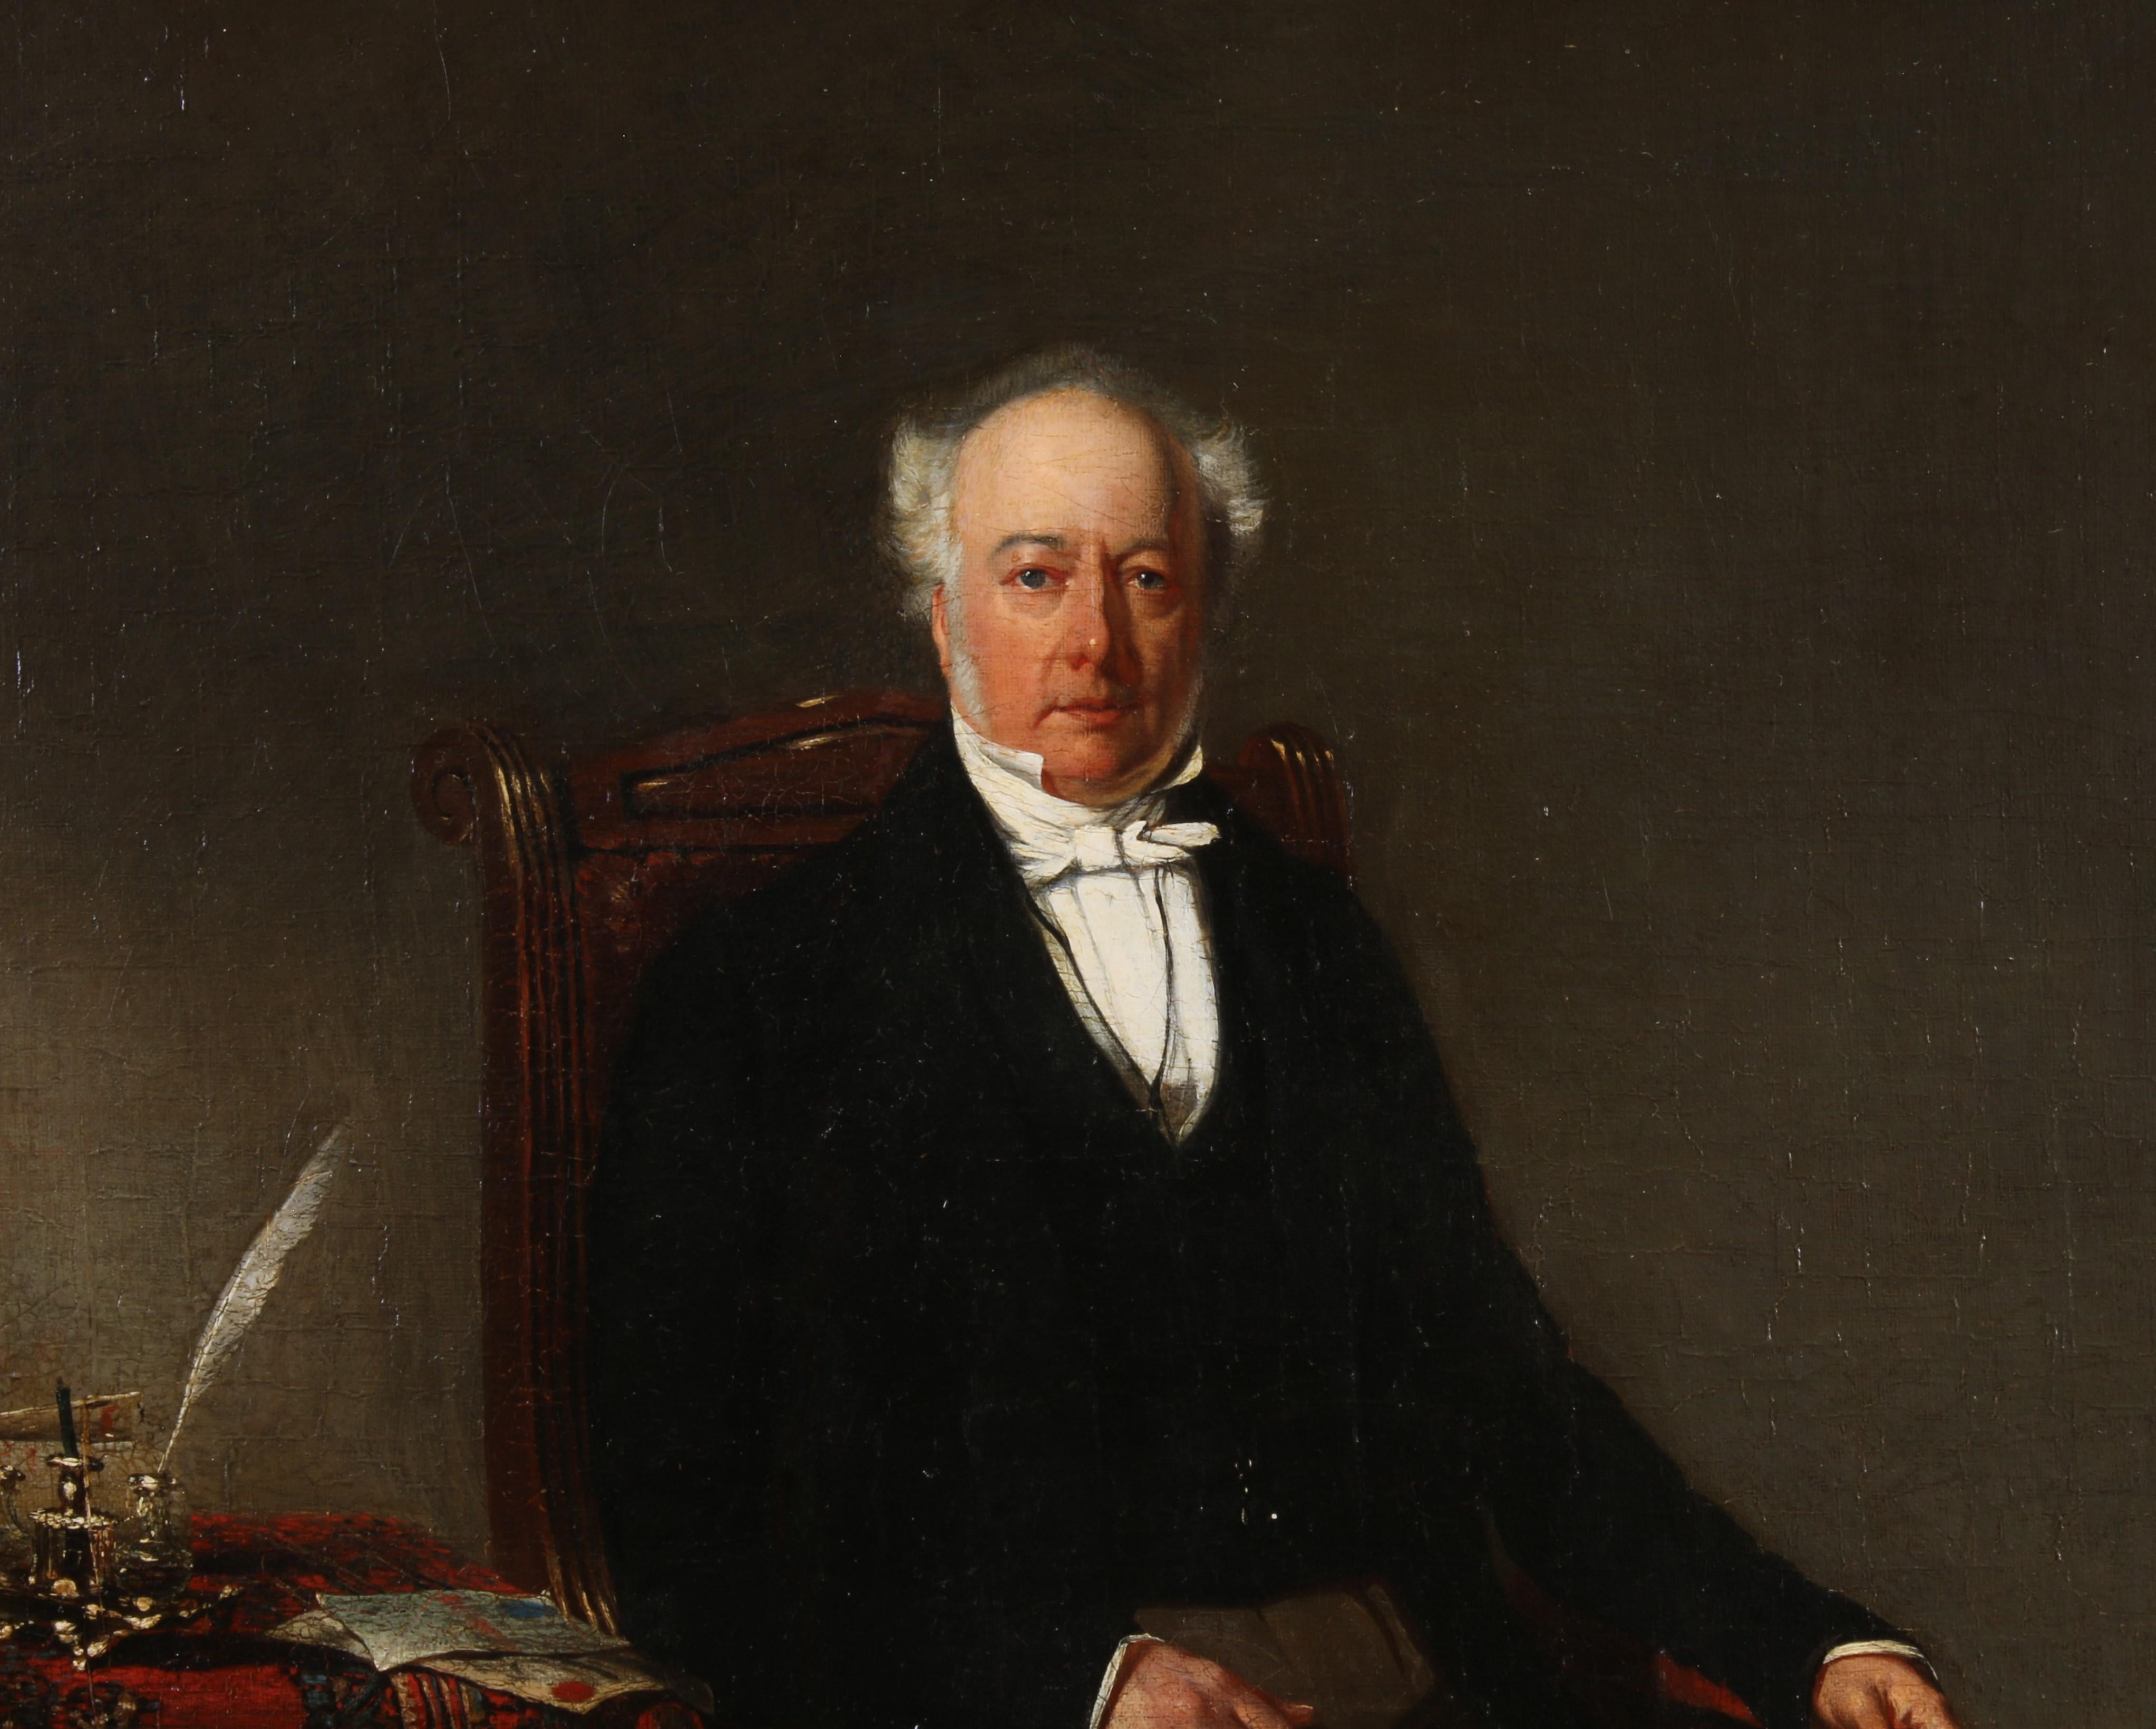 Charles Grey, 2nd Earl Grey, former Prime Minister of the United Kingdom - Painting by Phillip Westcott